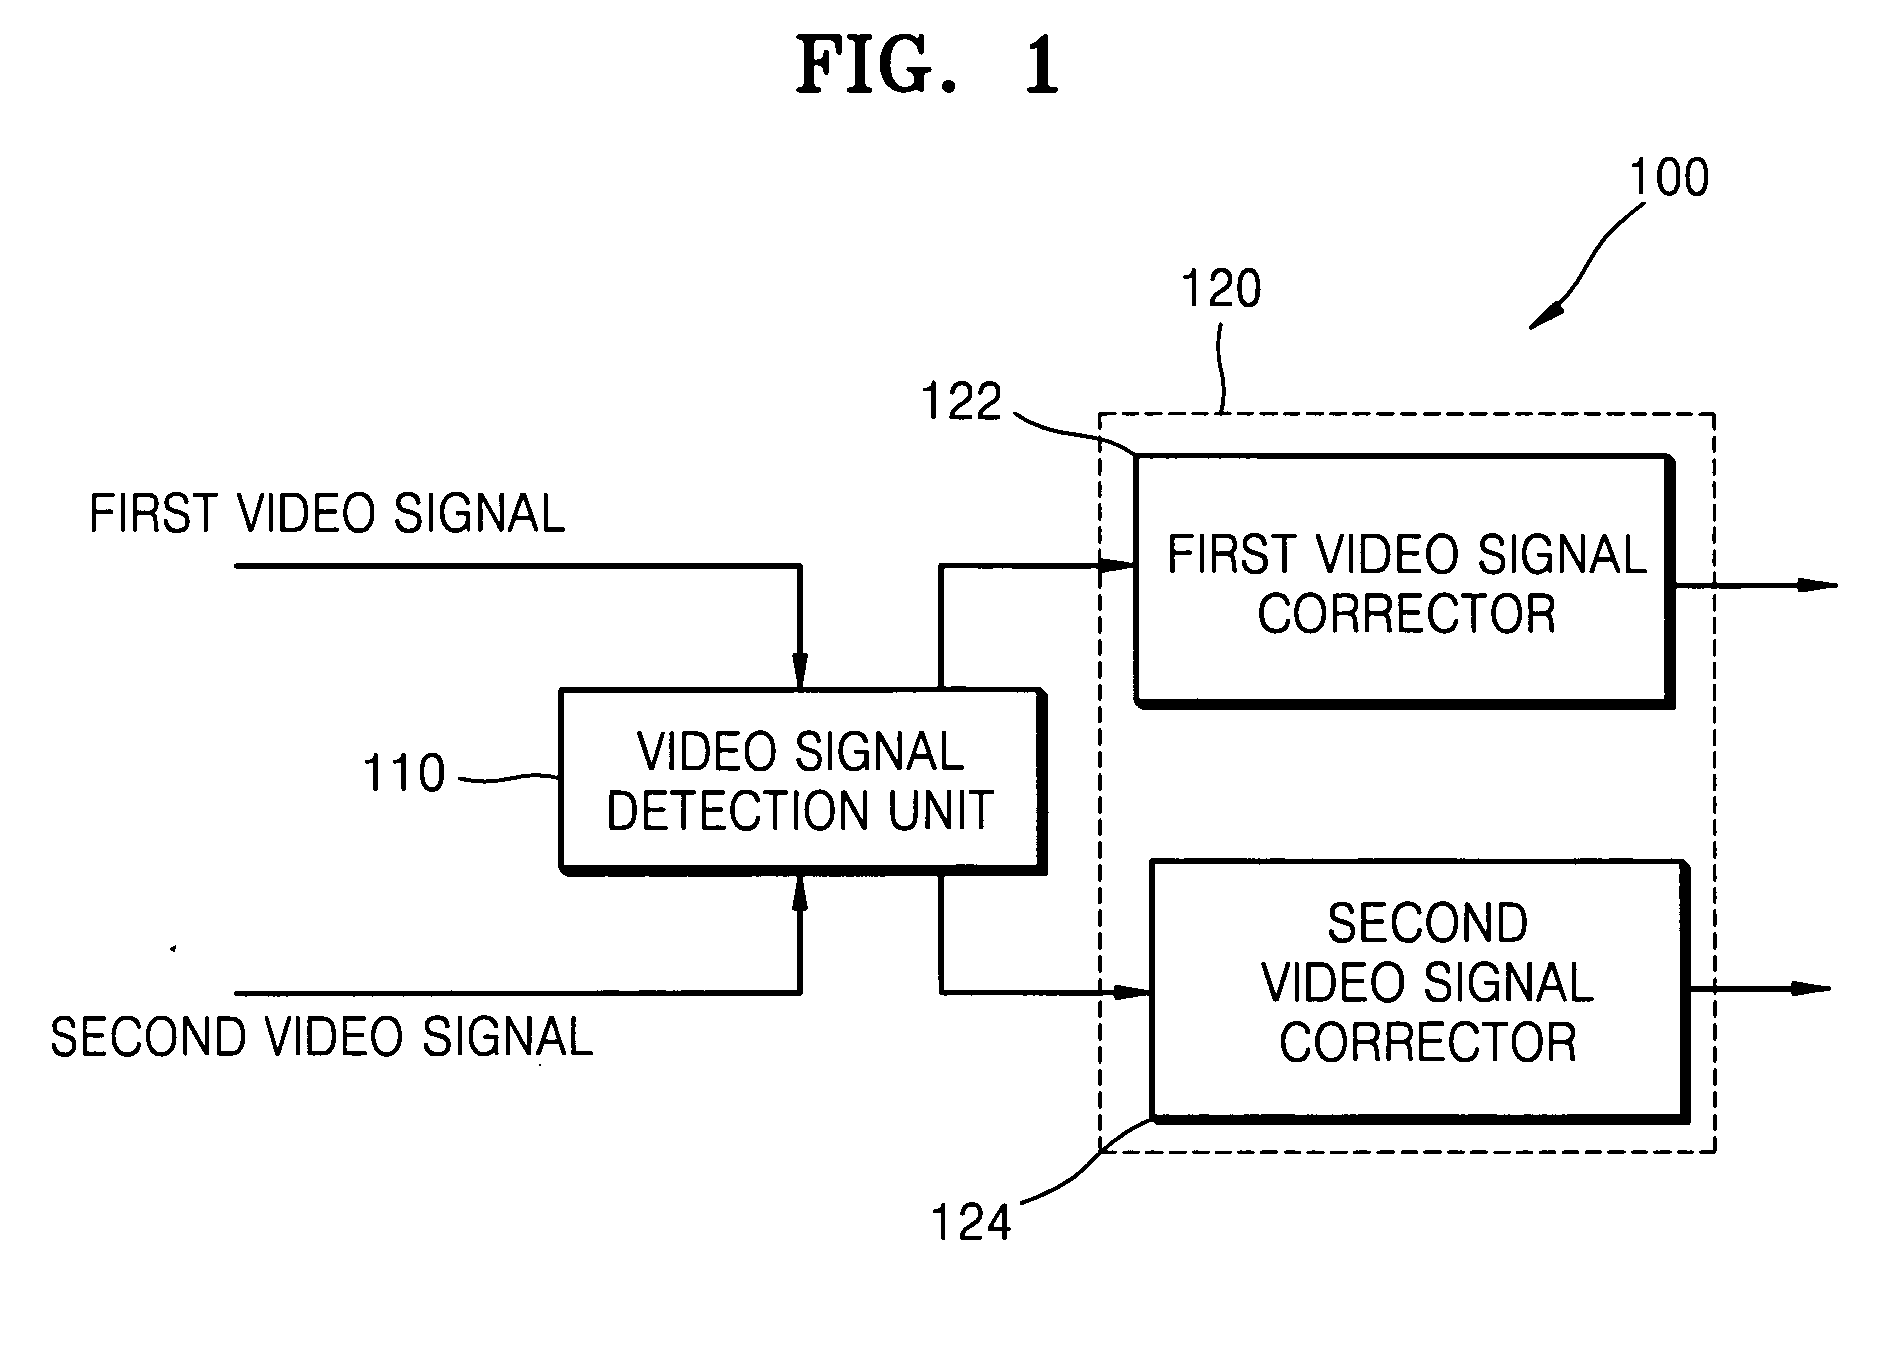 Apparatus and method for processing 3D video signal